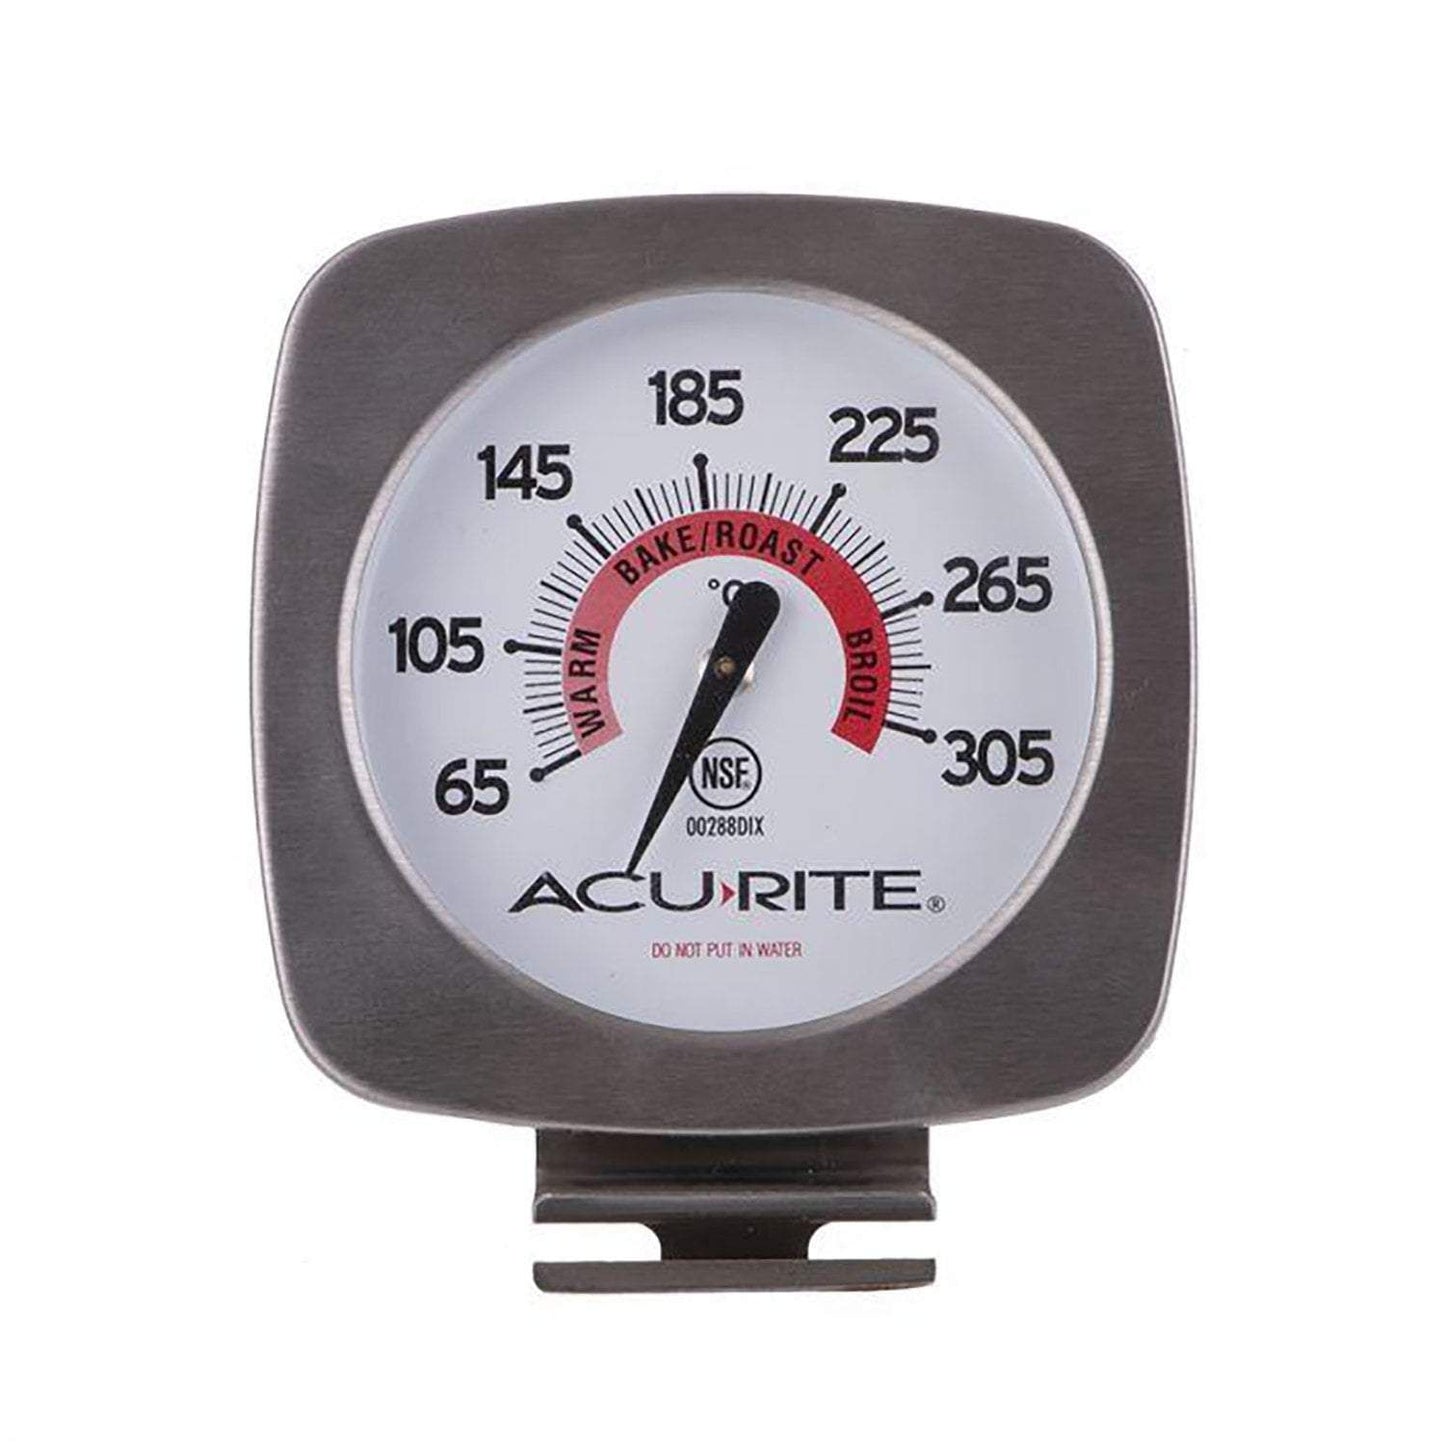 Acurite Gourmet Oven Thermometer Dial